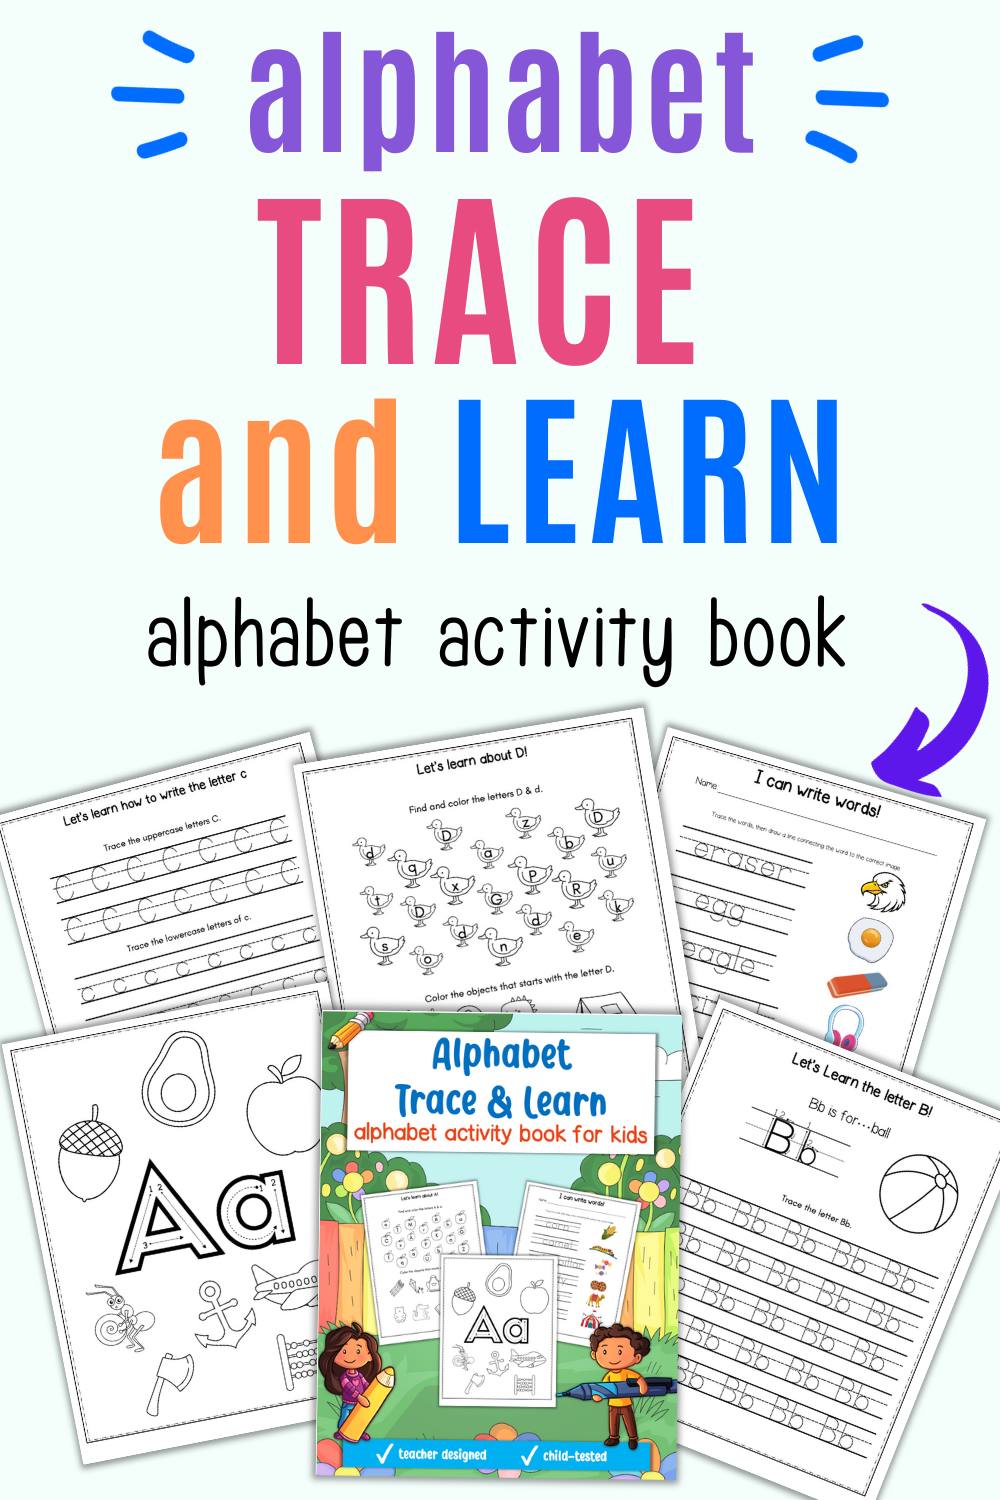 Text "alphabet trace and learn alphabet activity book" with a  preview of the front cover of and five pages from an alphabet workbook 